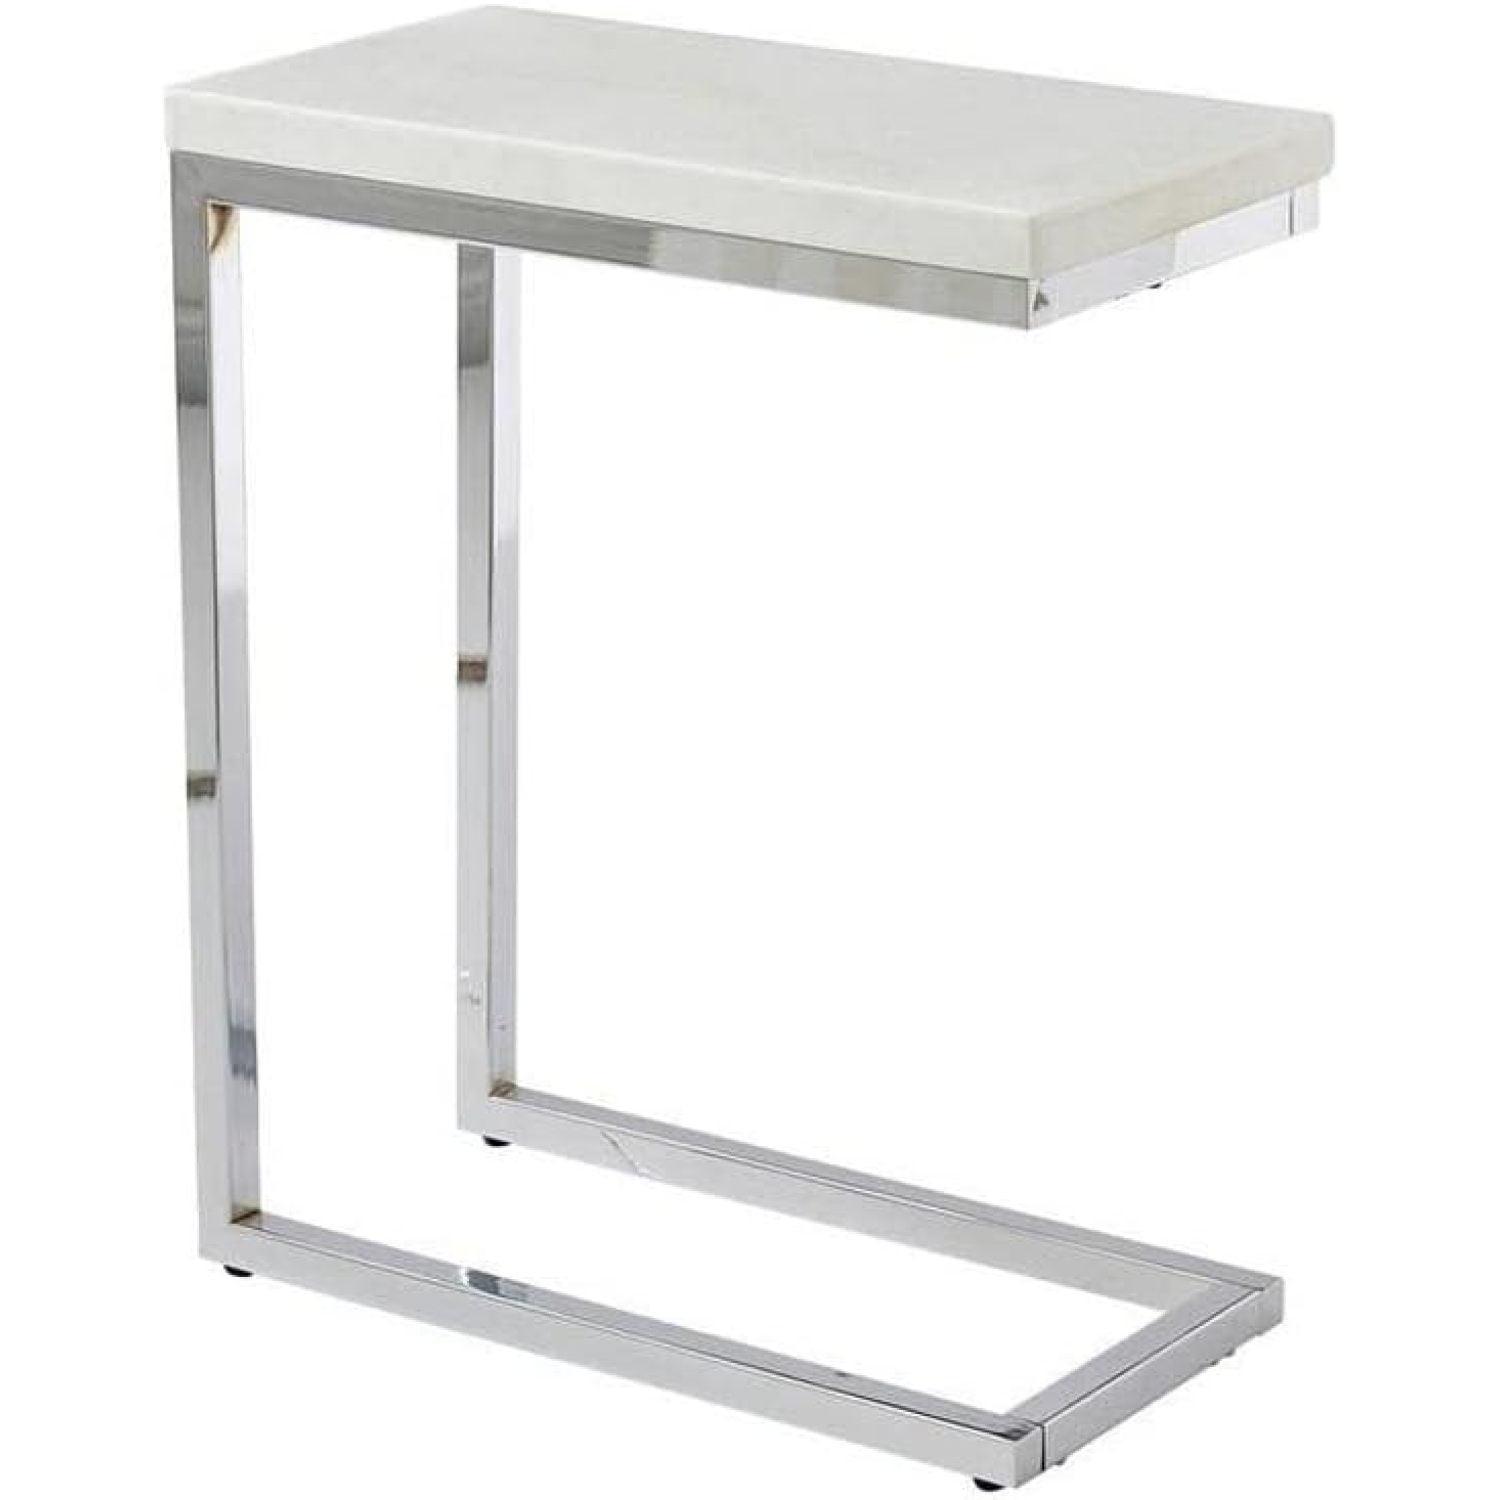 Echo White Marble and Chrome Rectangular Chairside Table